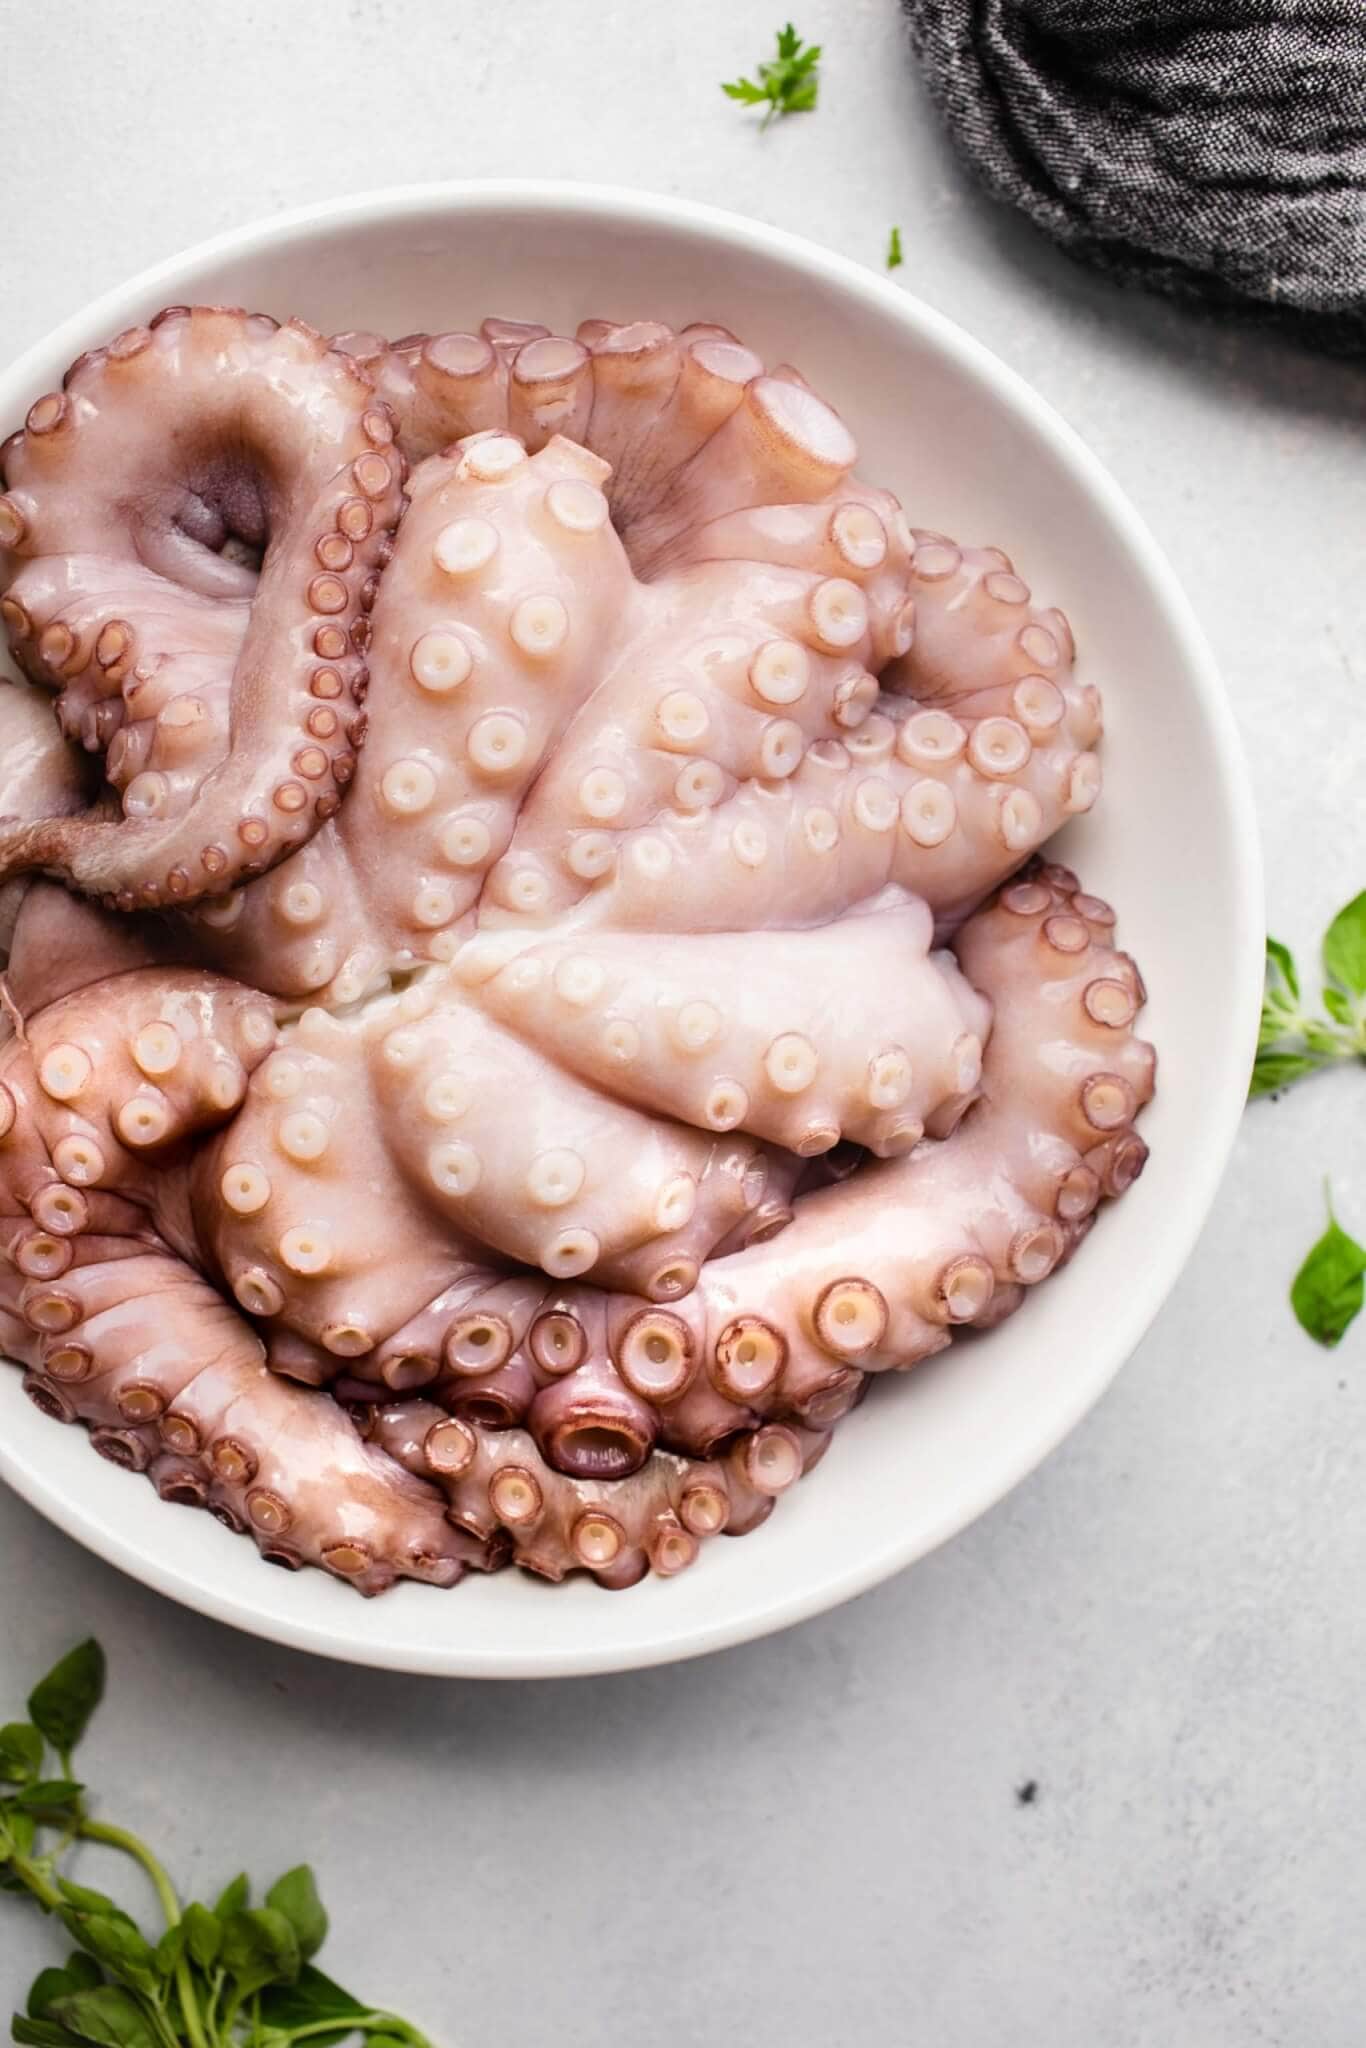 Uncooked octopus in large white bowl.